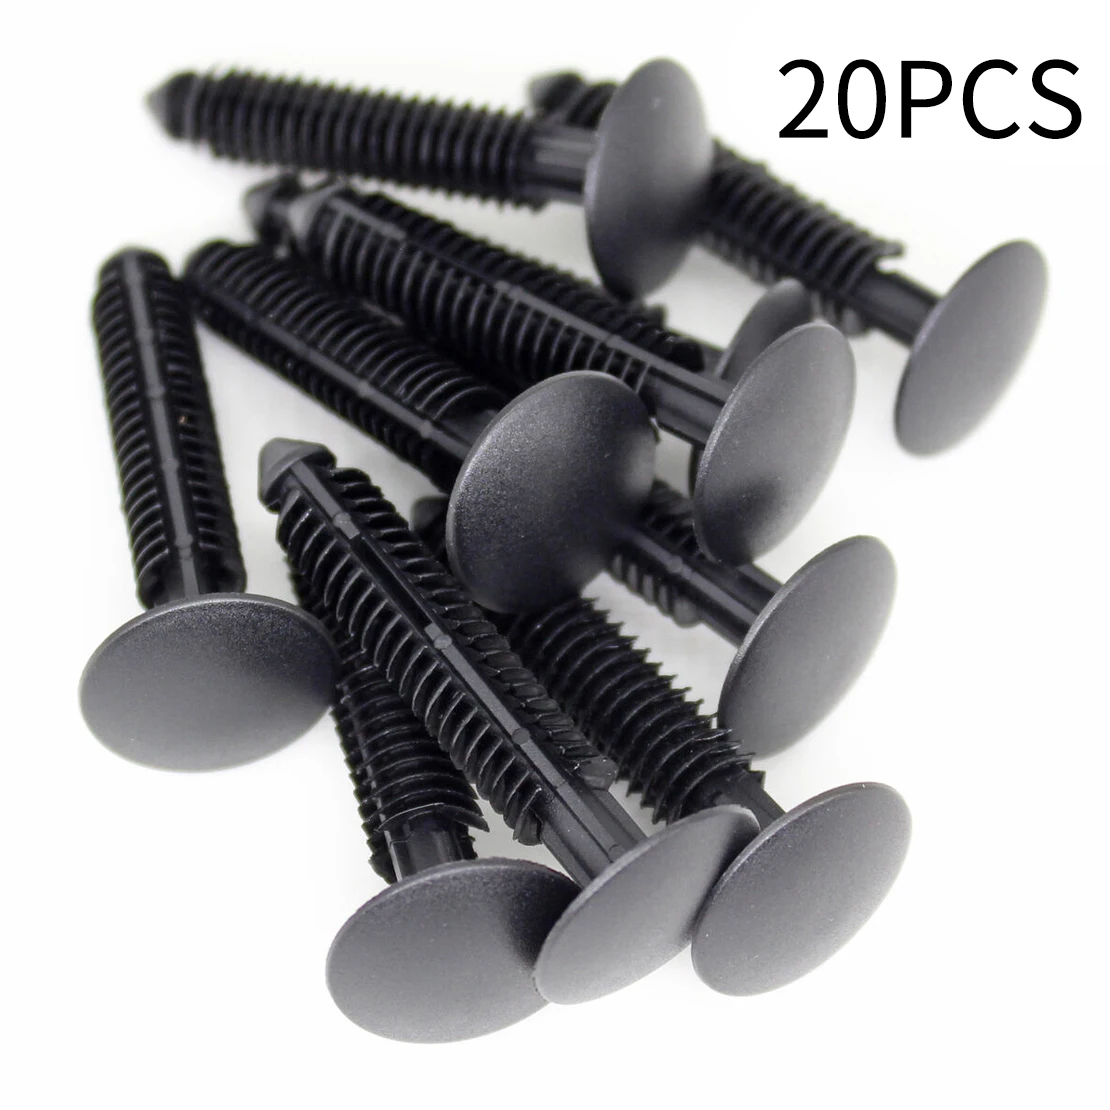 

W710532-S300 20Pcs Black Plastic Rocker Molding Clip Retainer Fastener Fit for Ford Mustang 2005-2007 2008 2009 2010 2011 2012